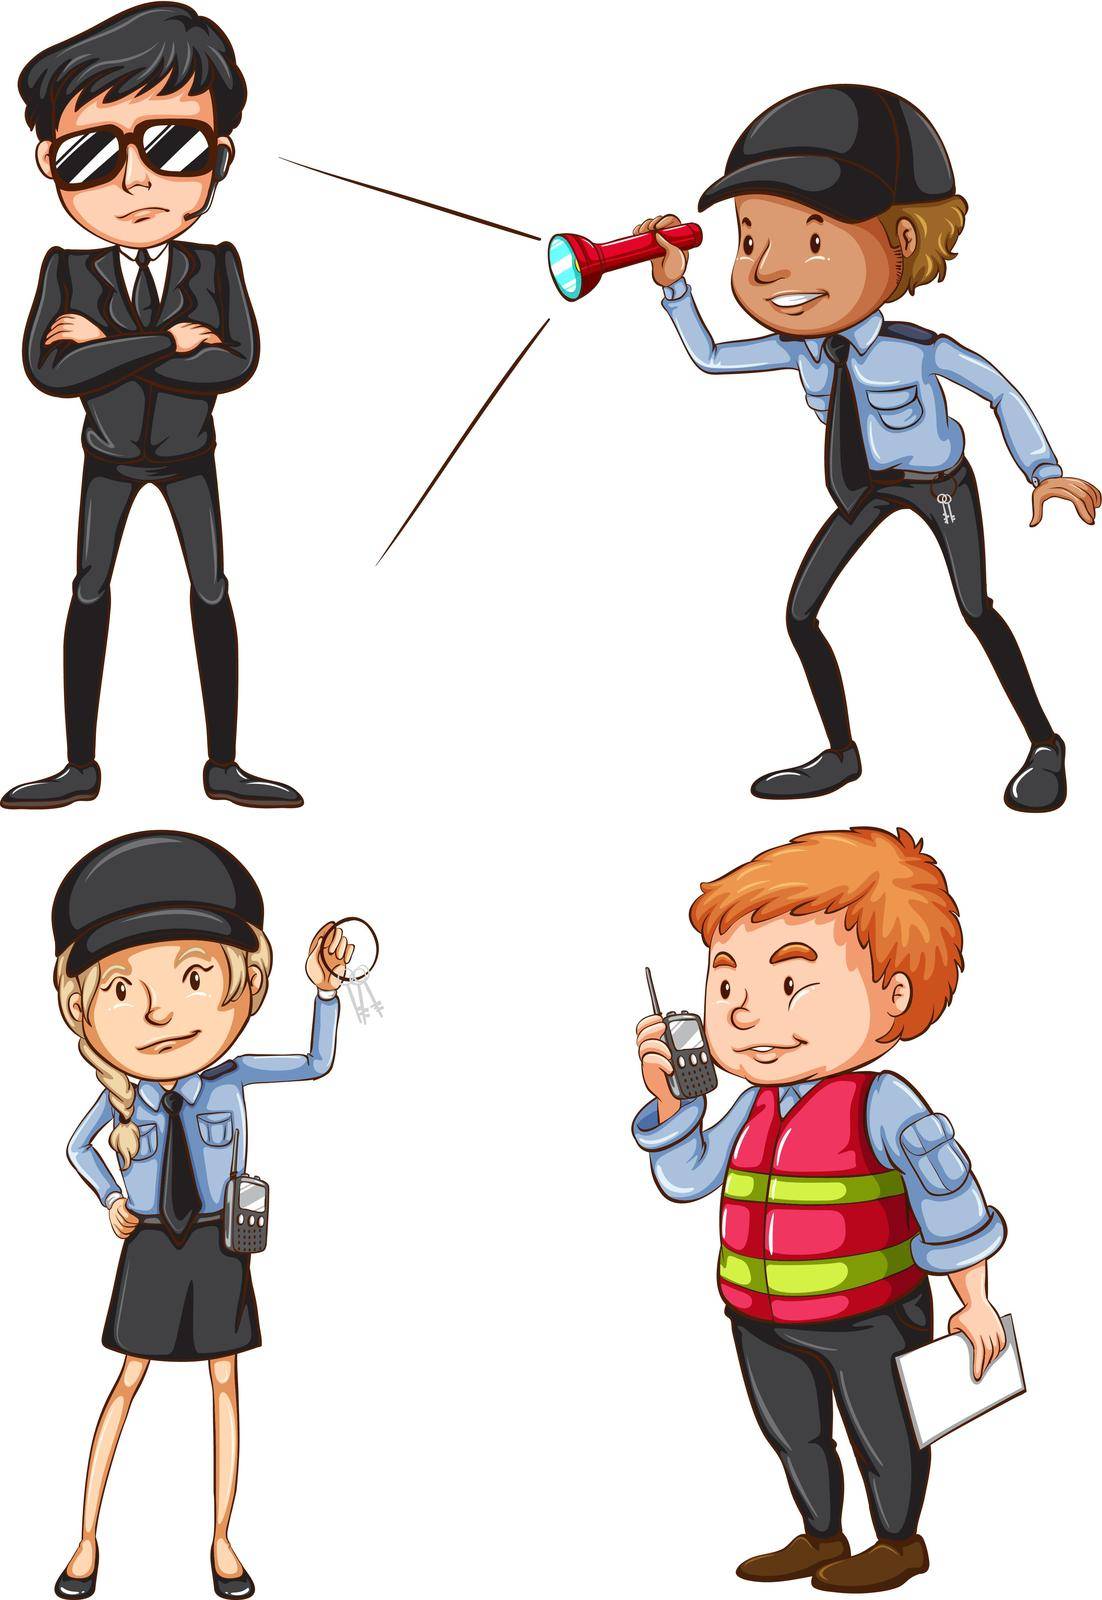 Colourful drawing of the security guards on a white background